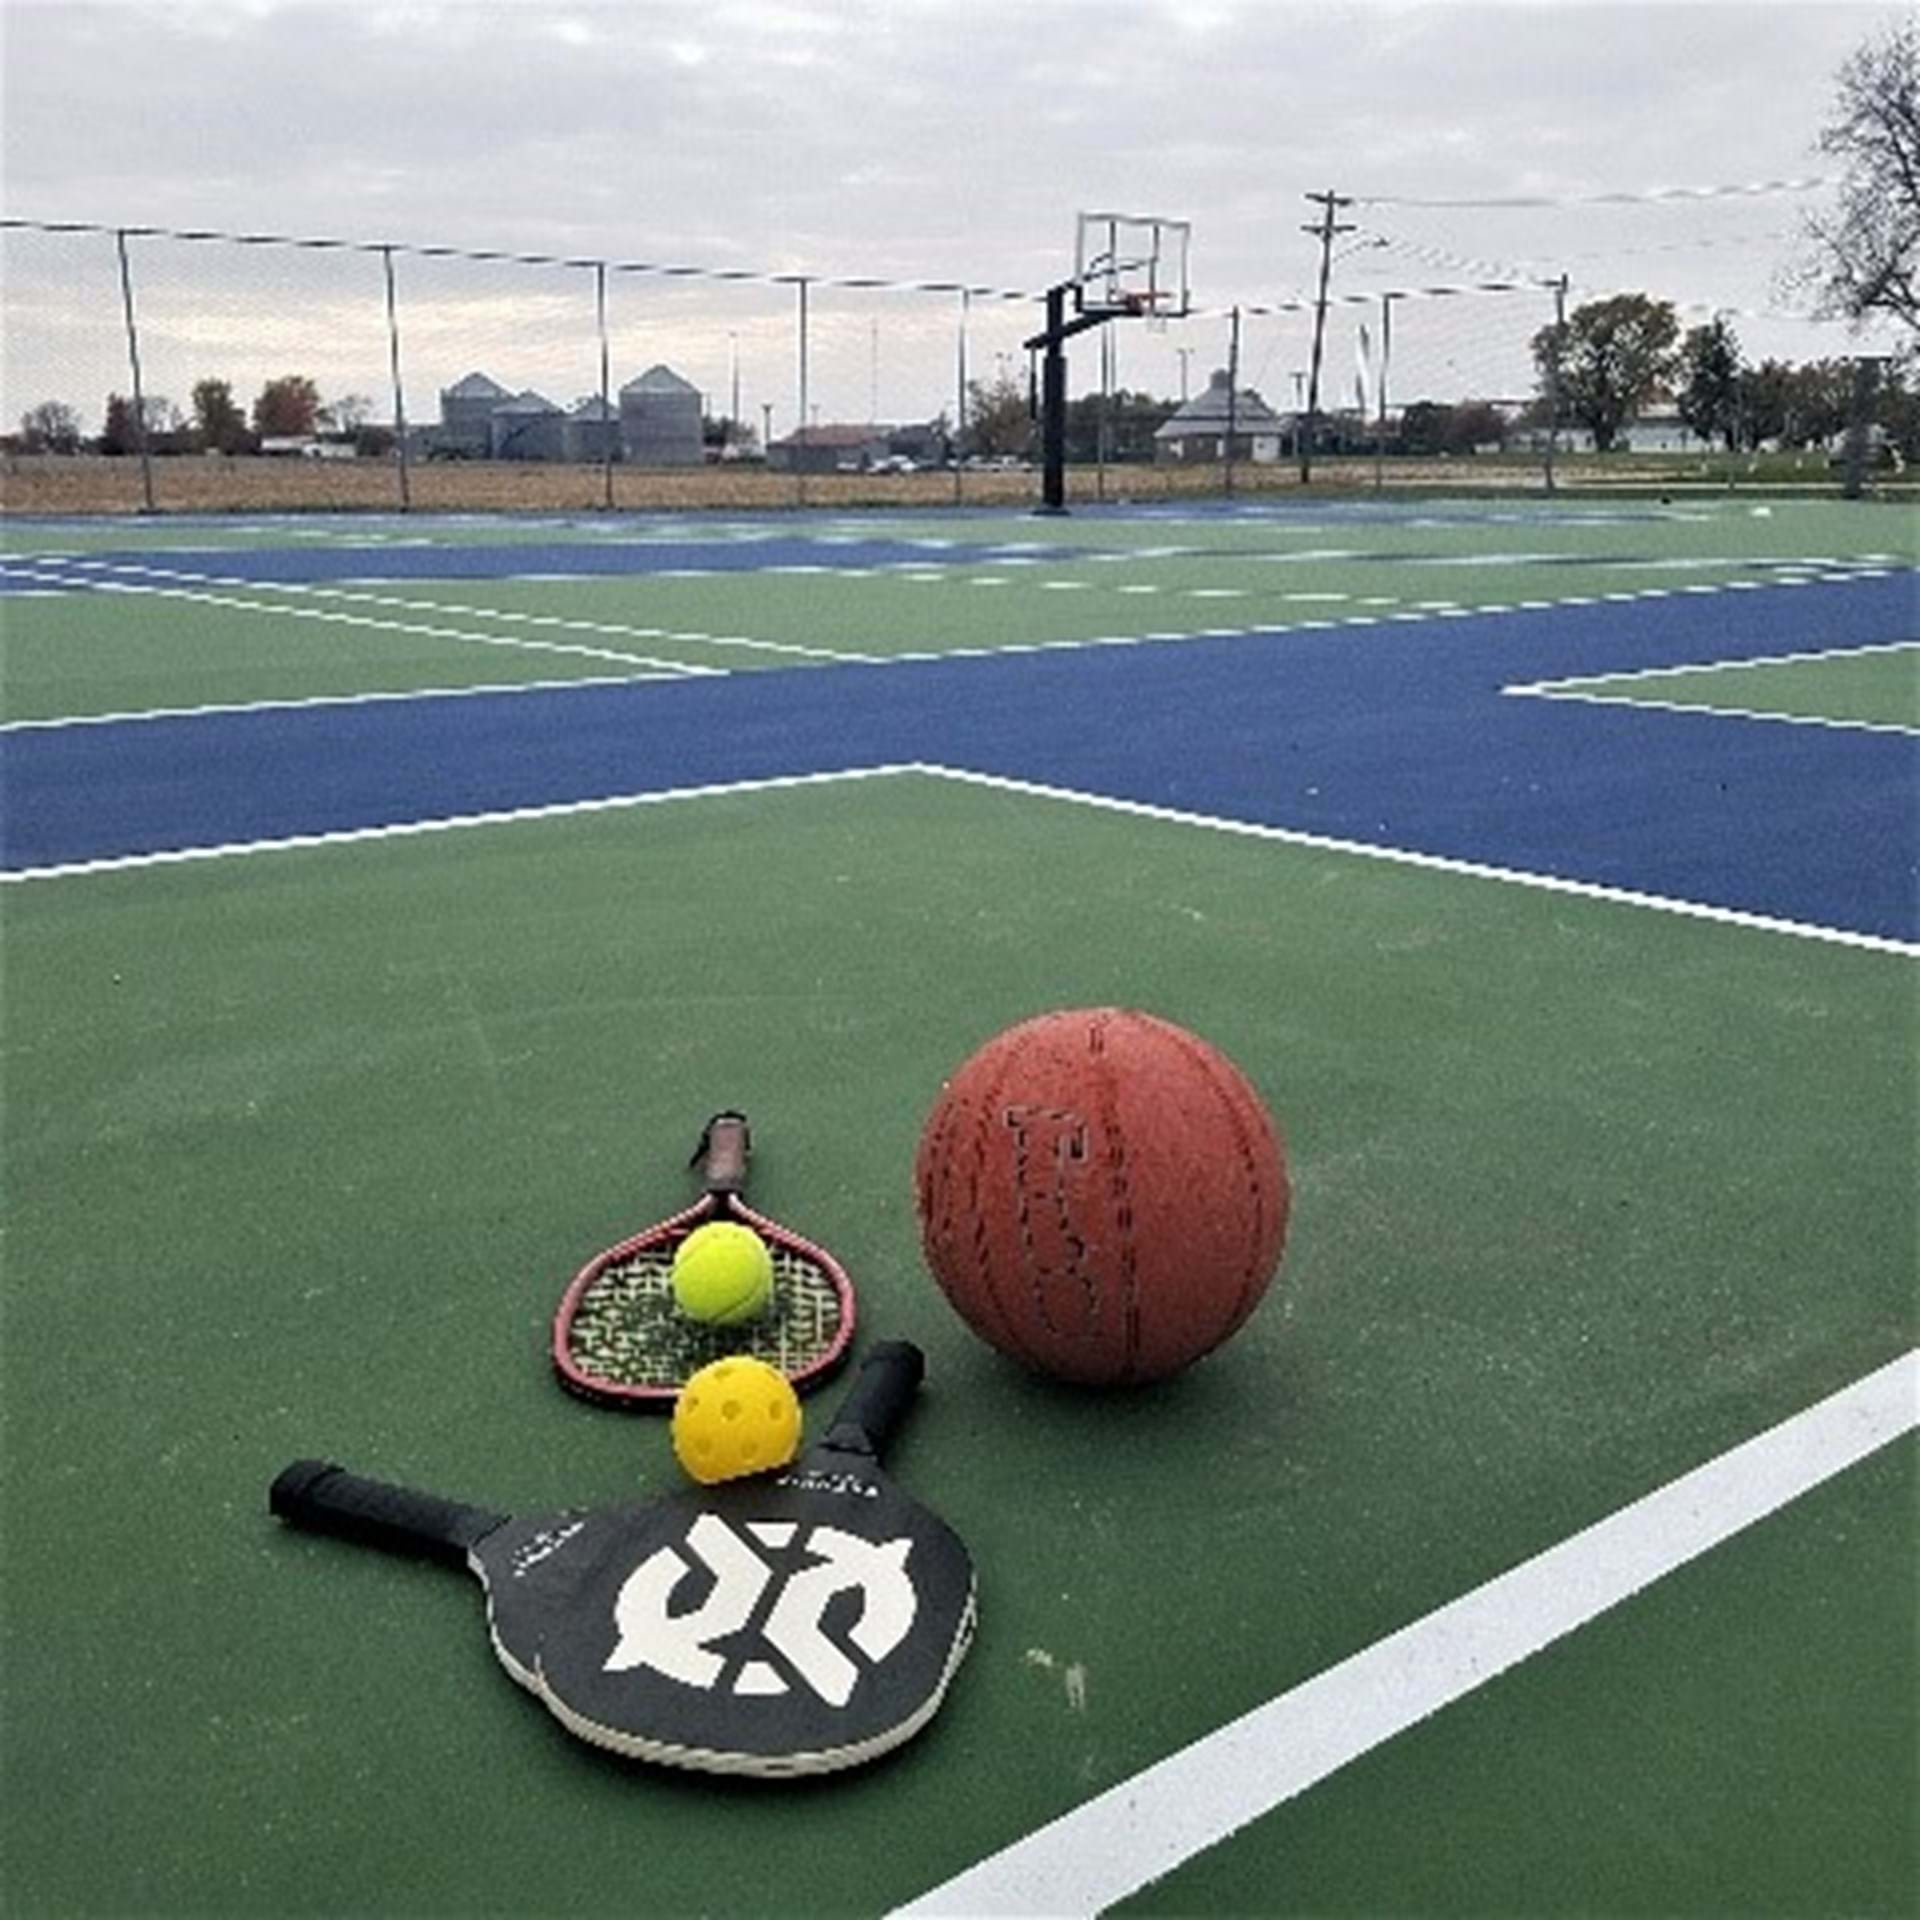 What's your sport? Pickleball, basketball, tennis, shuffleboard, 4-square? Play it here.